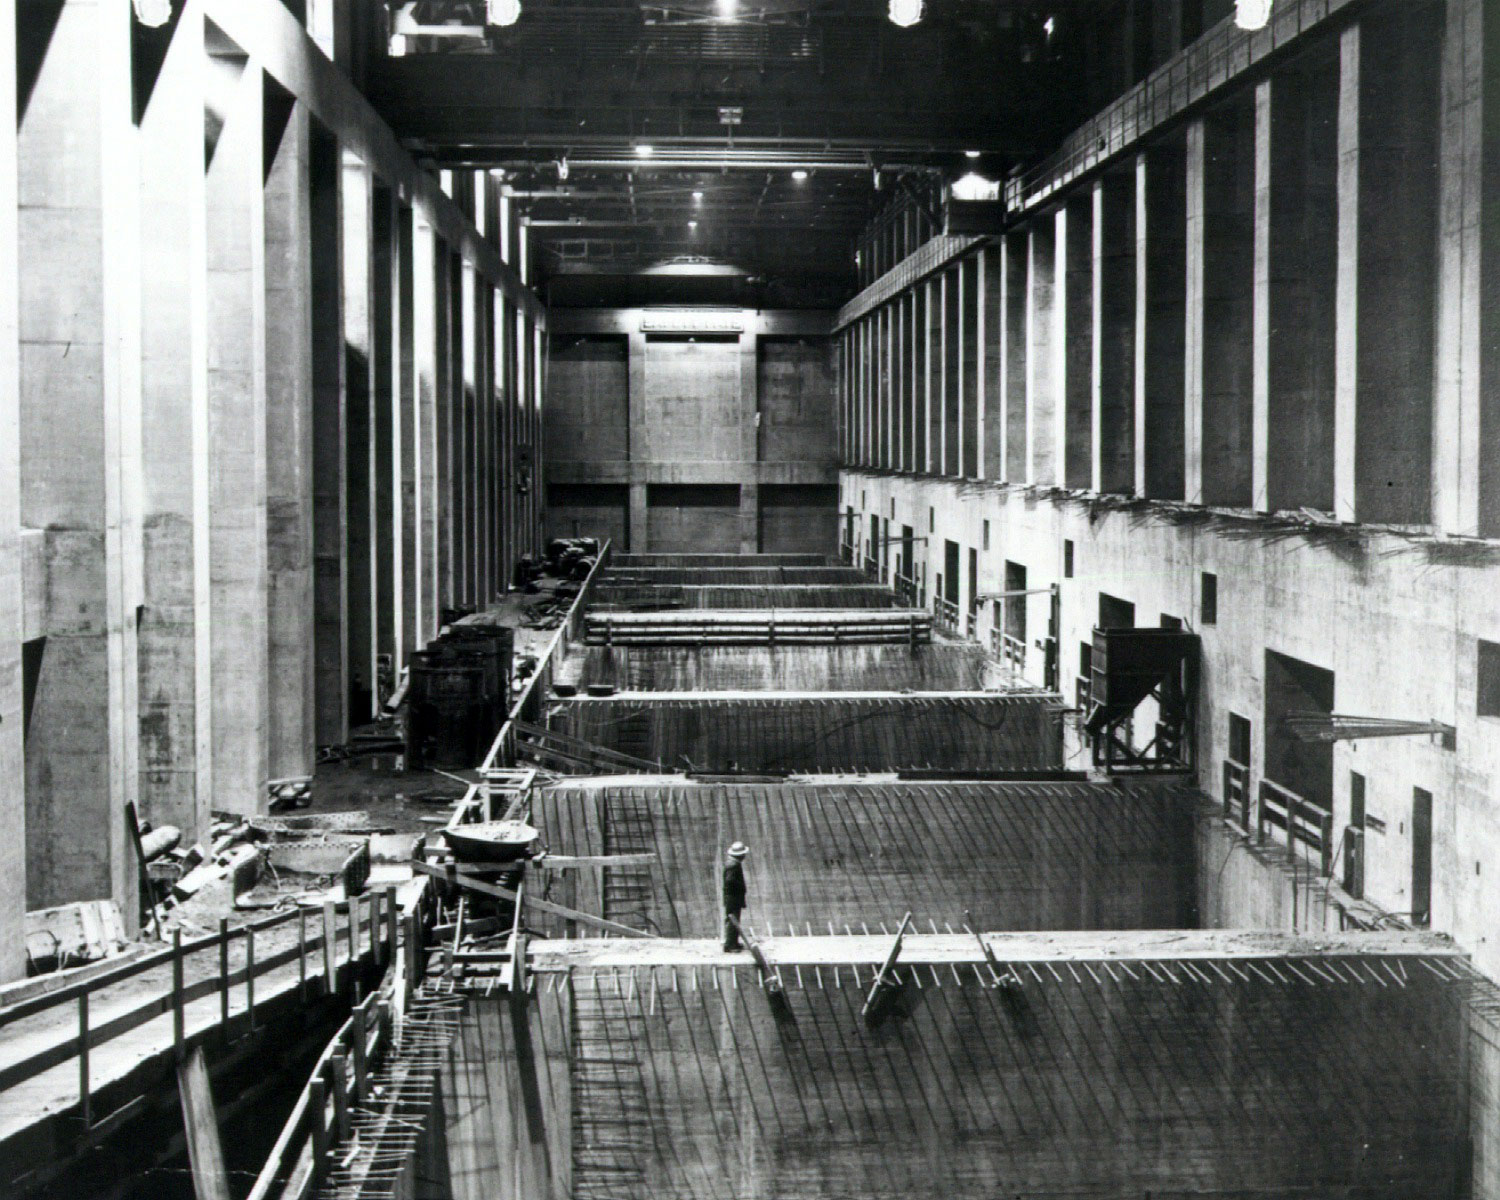 By 1941, the dam is essentially completed, the Left Powerplant is constructed, and the foundations are in place for the Right Powerplant and pumping plant.
